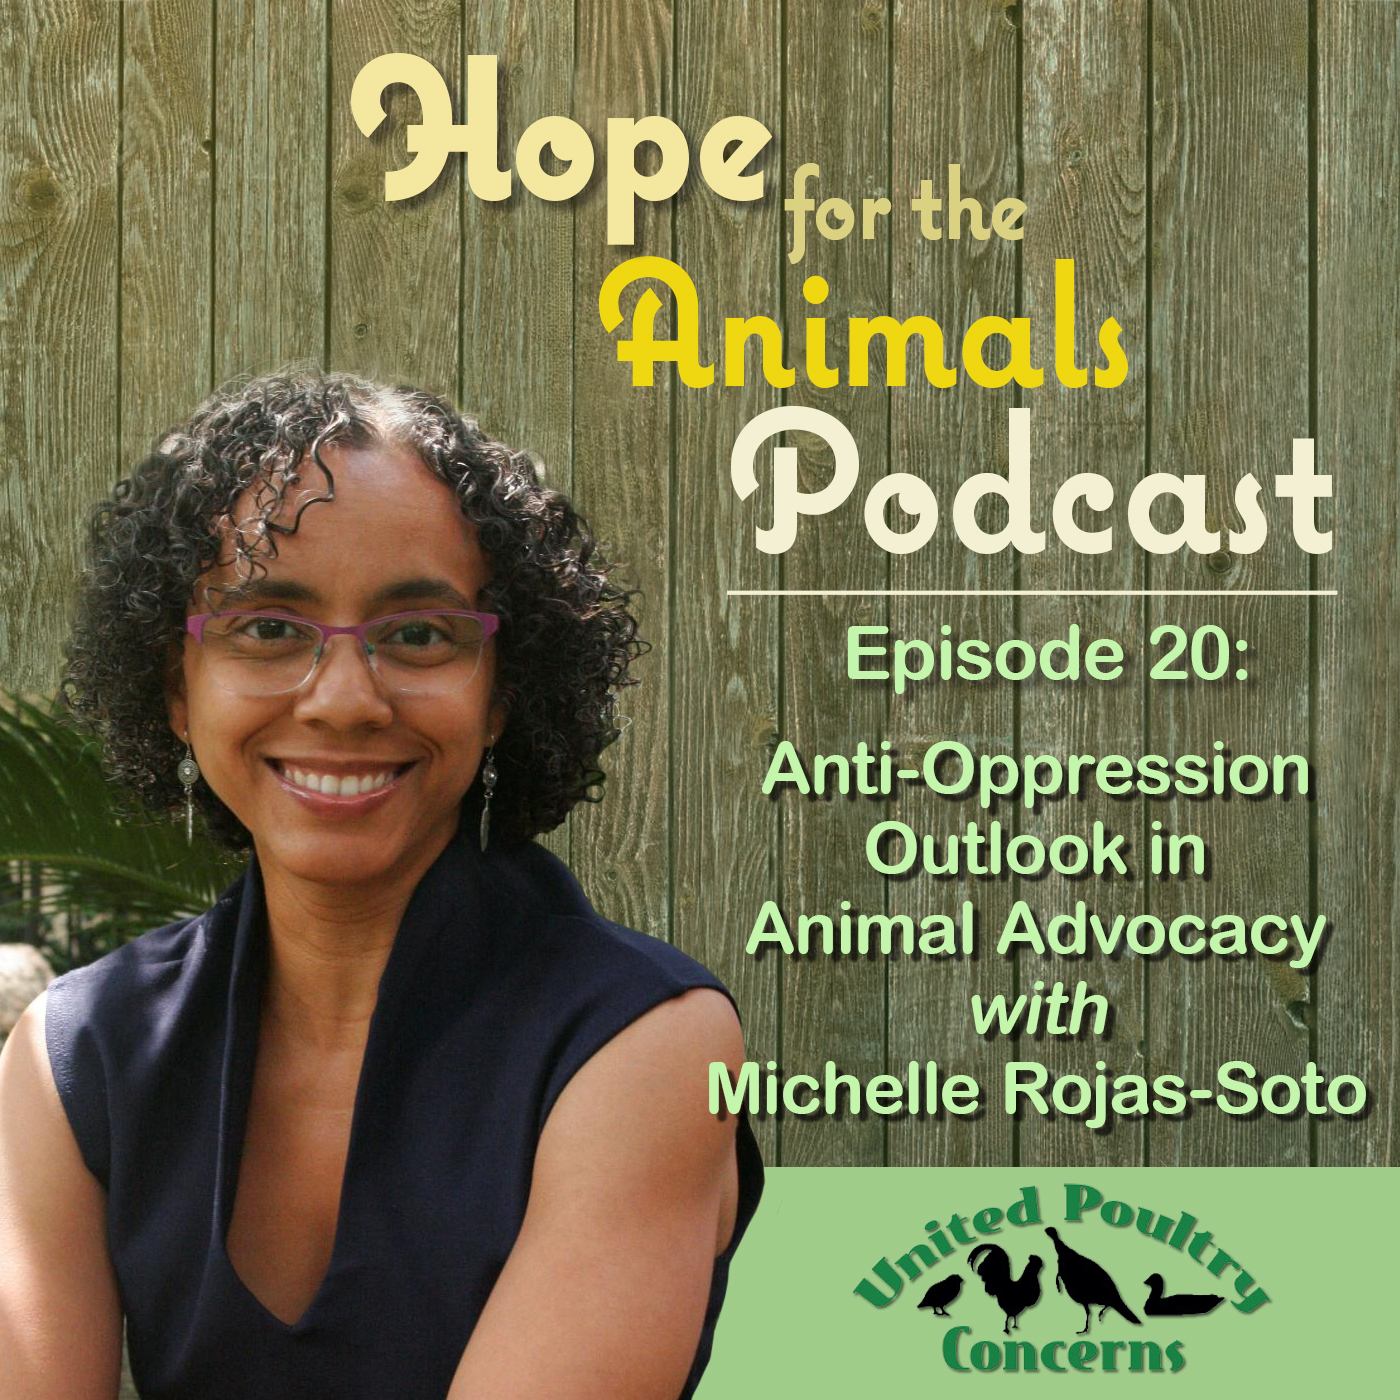 Episode 20: Anti-Oppression Outlook in Animal Advocacy with Michelle Rojas-Soto